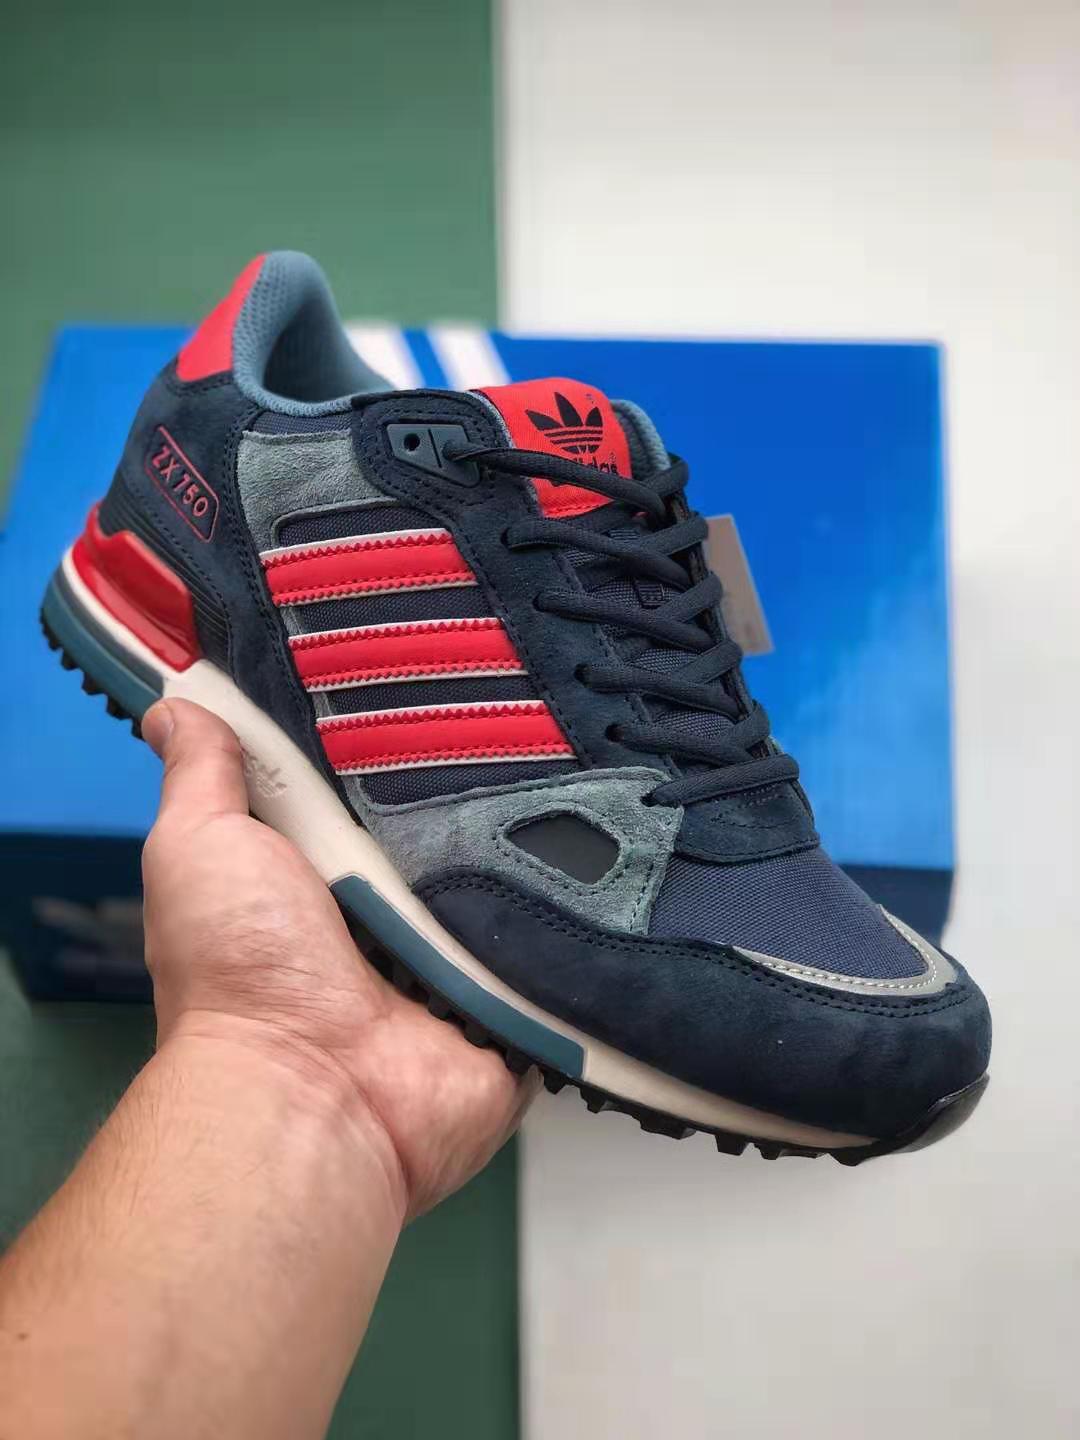 Adidas ZX 750 Navy Black Red M18260 - Stylish and Versatile Sneakers